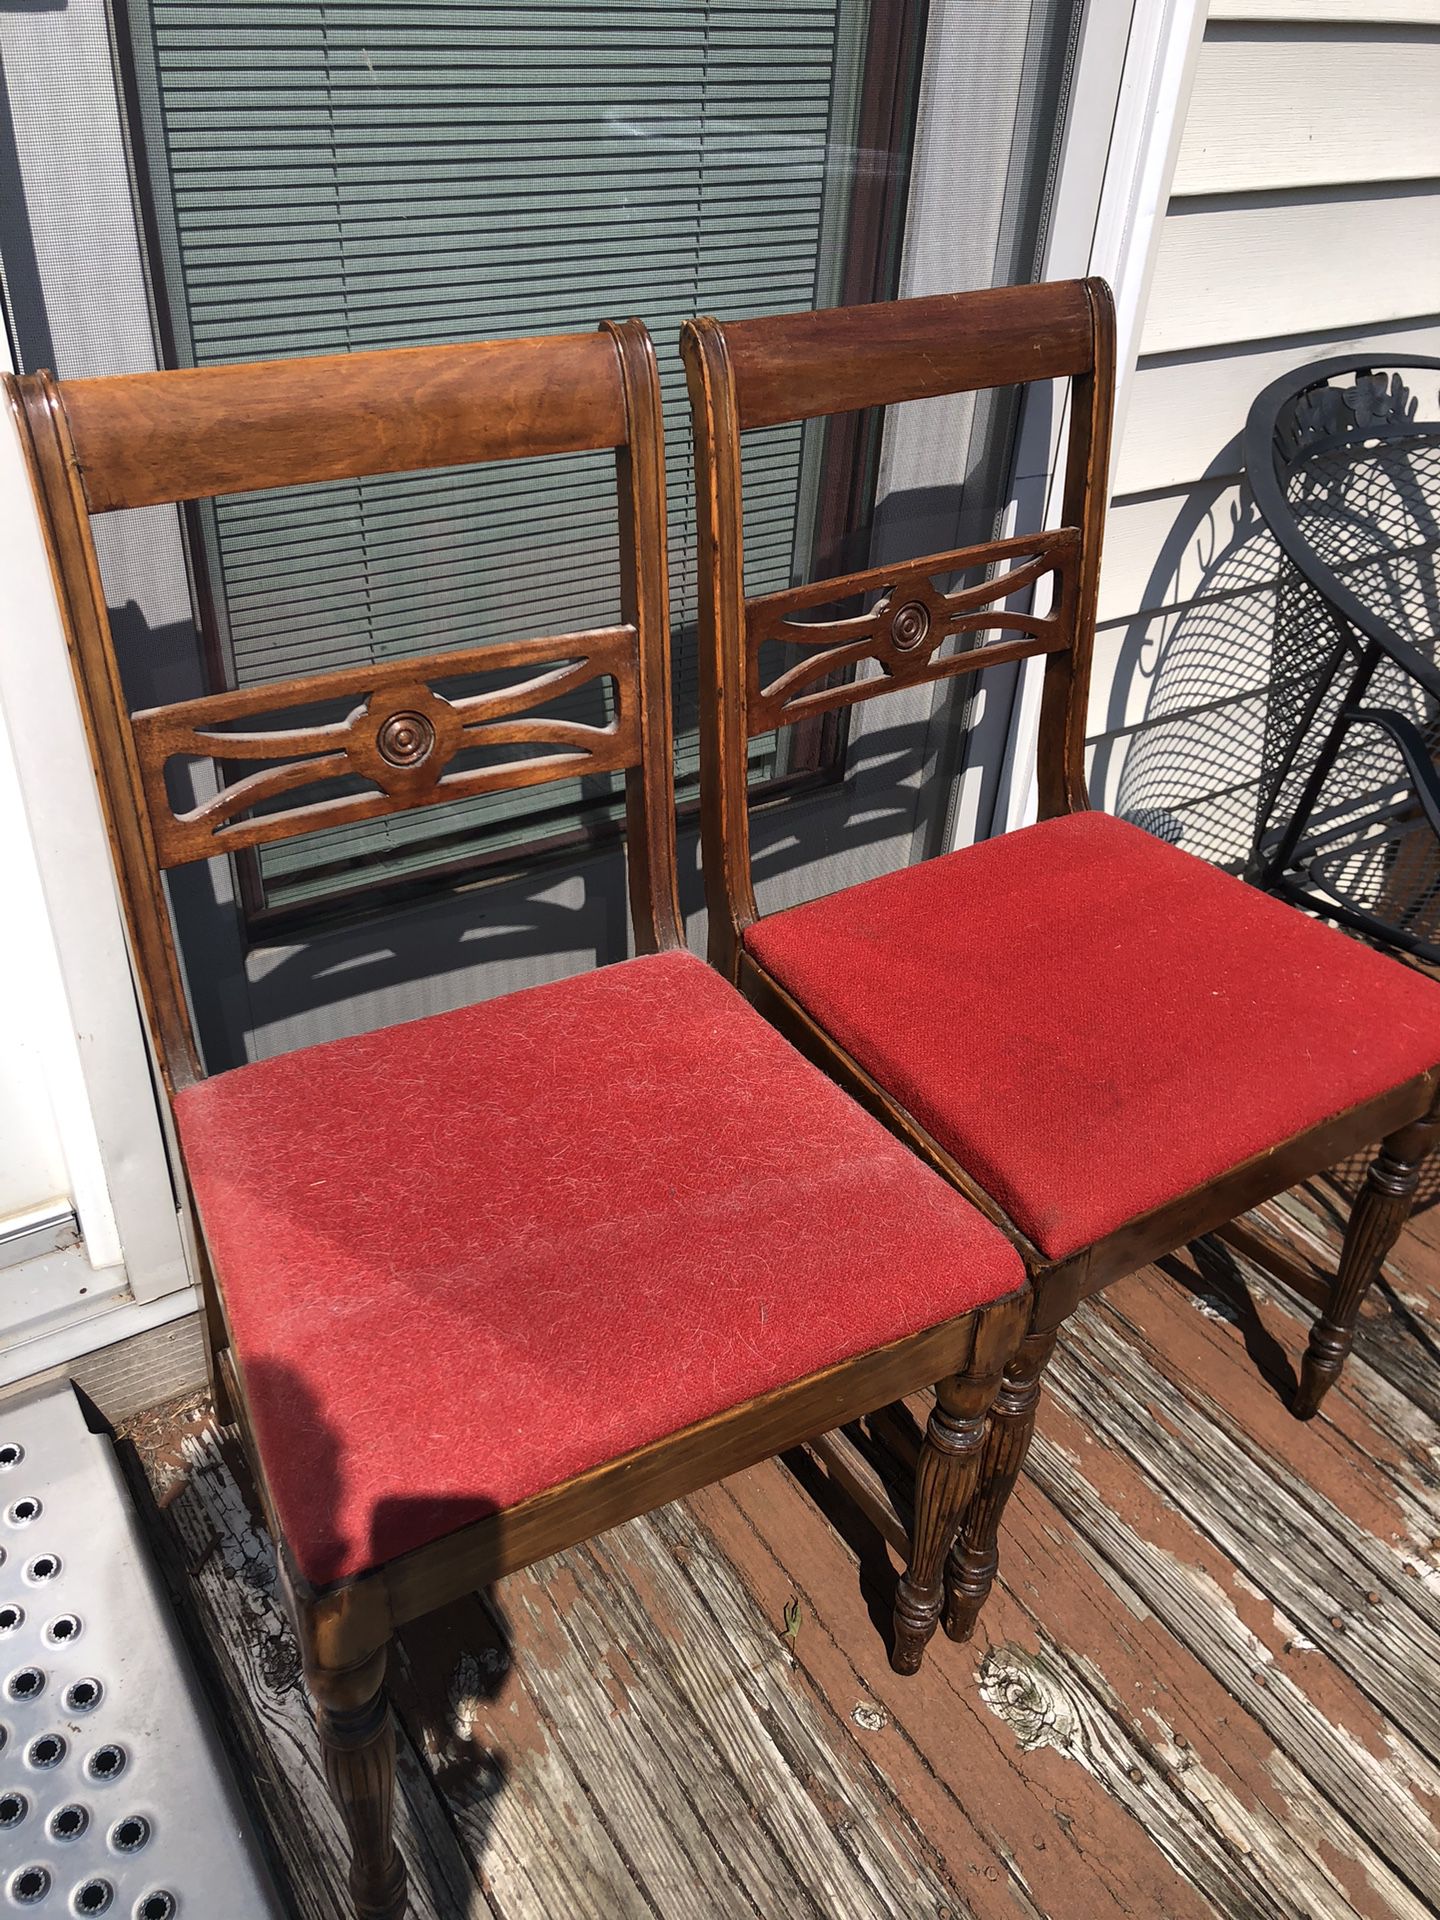 $100/Pair of Antique Chairs (ready to Use) Good Condition!